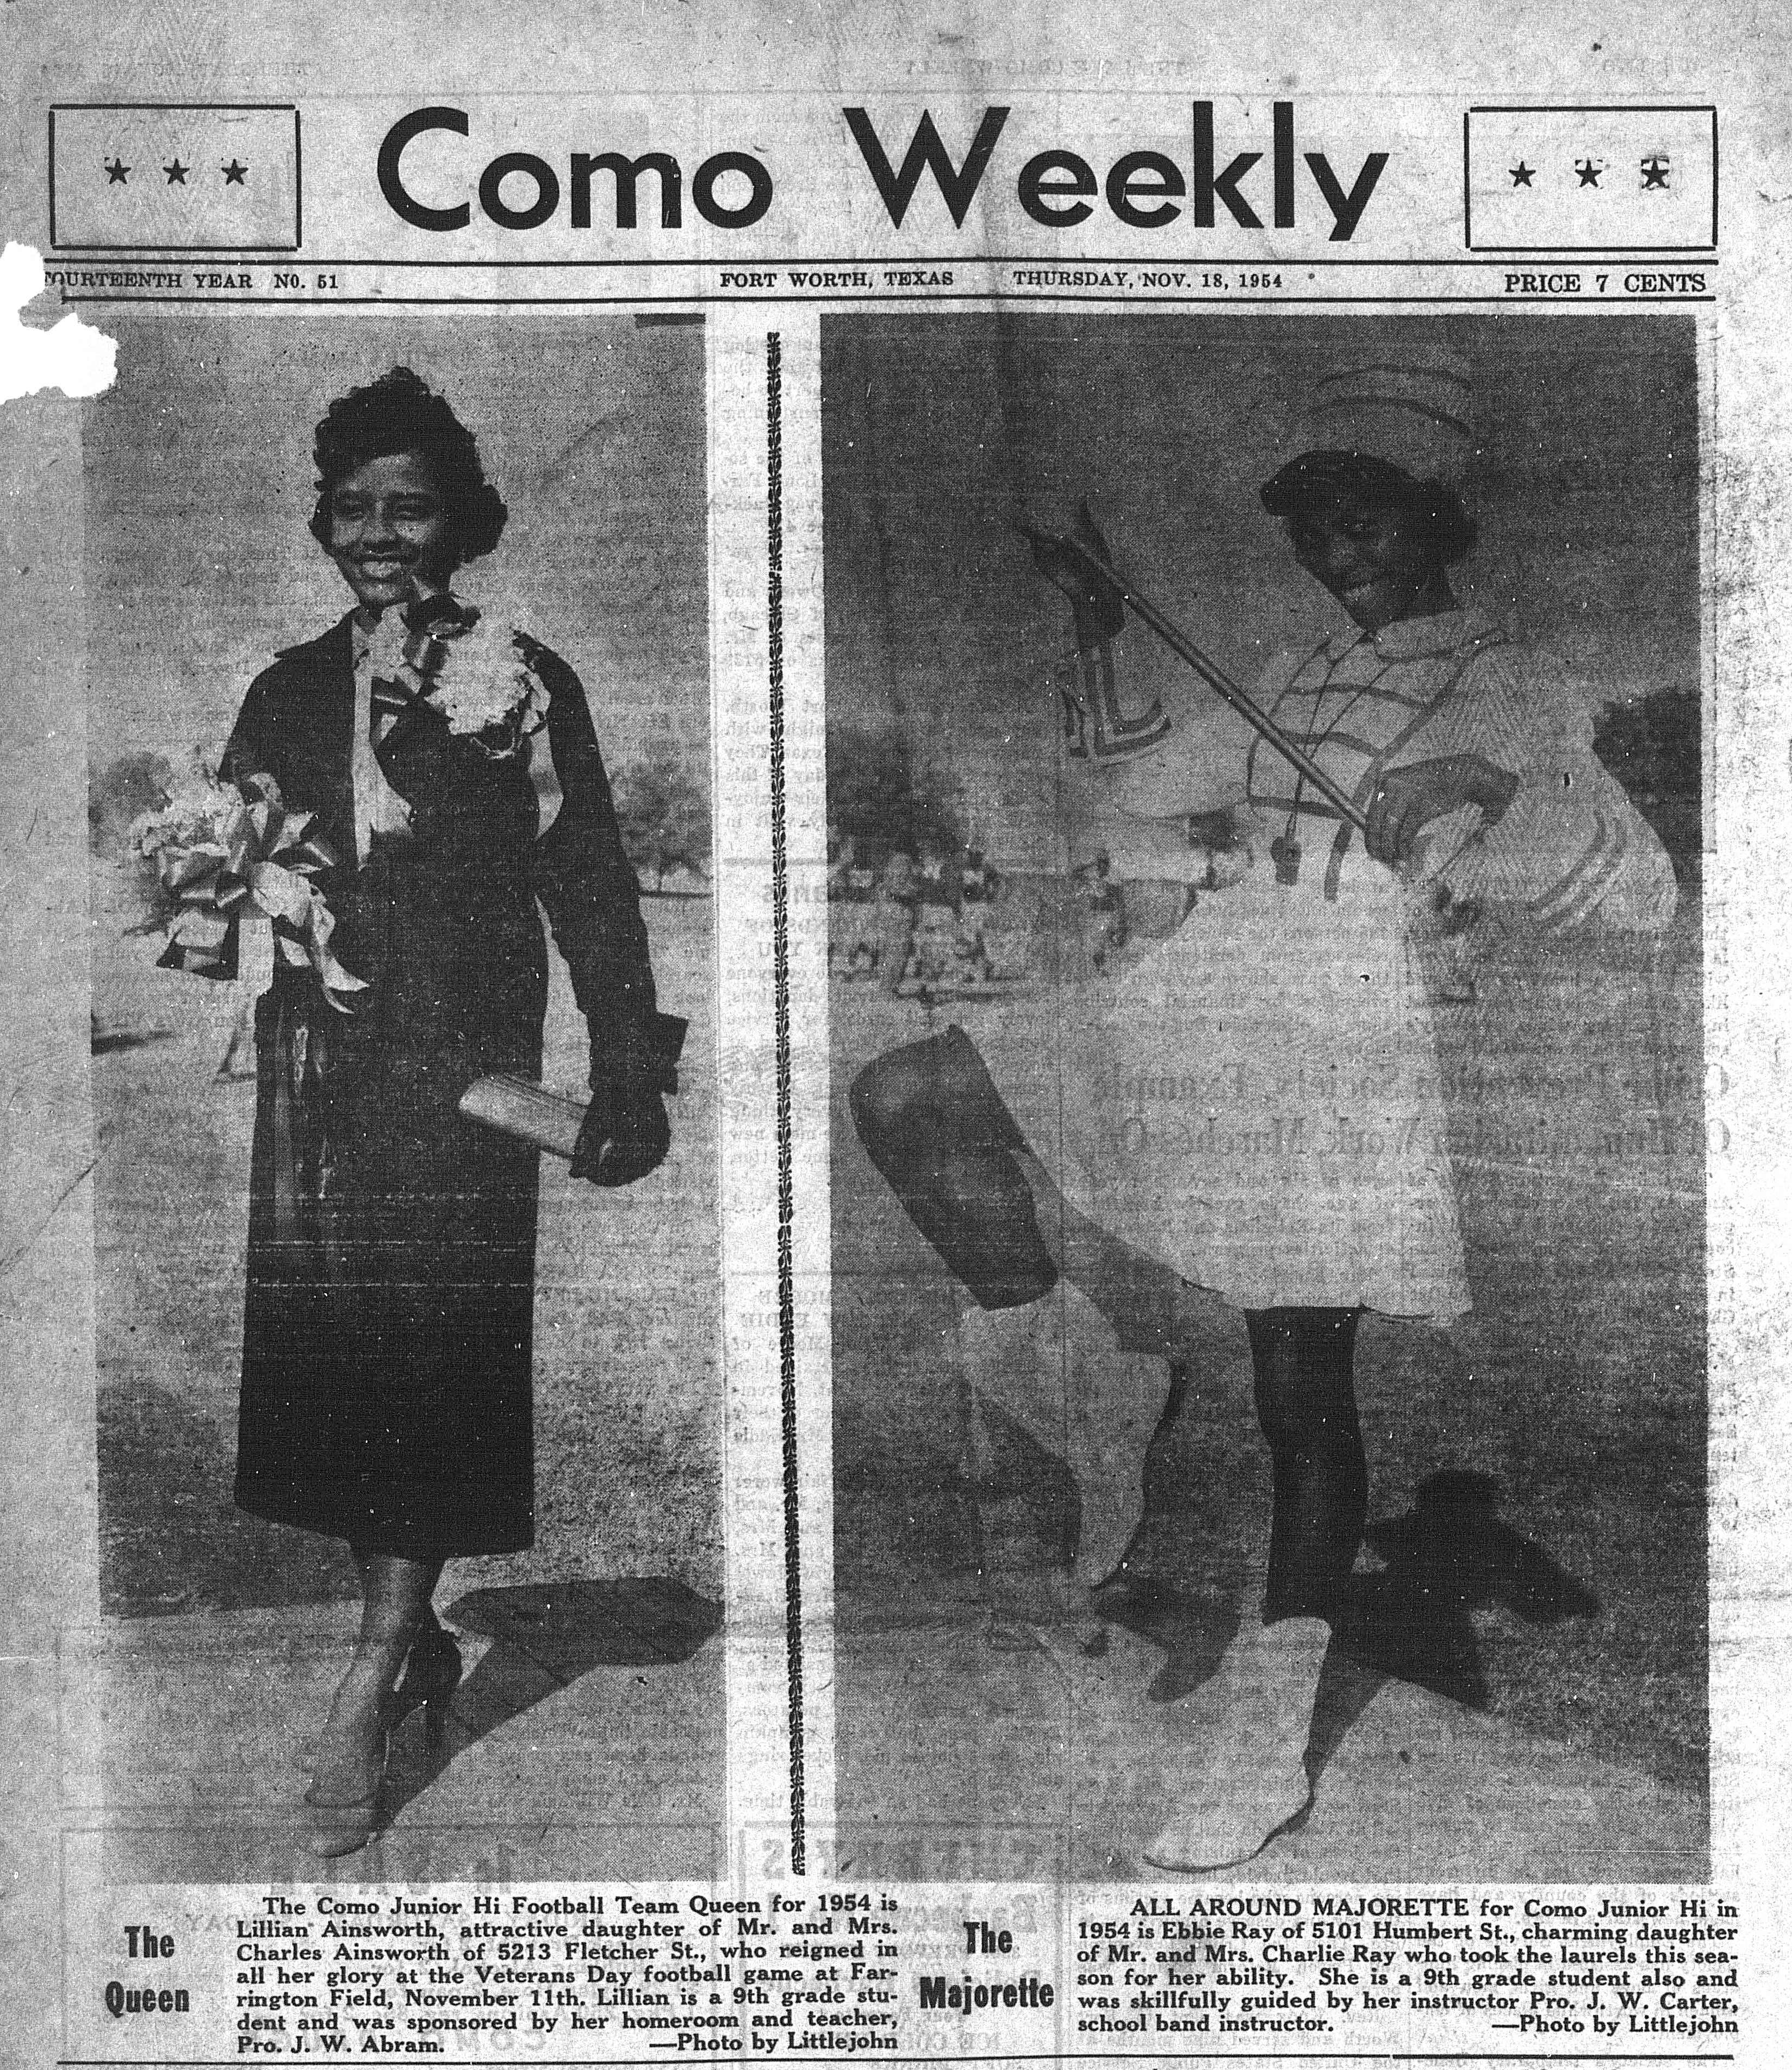 Front page of newspaper, Como Weekly, in 1954 showing two photographs of African American women.